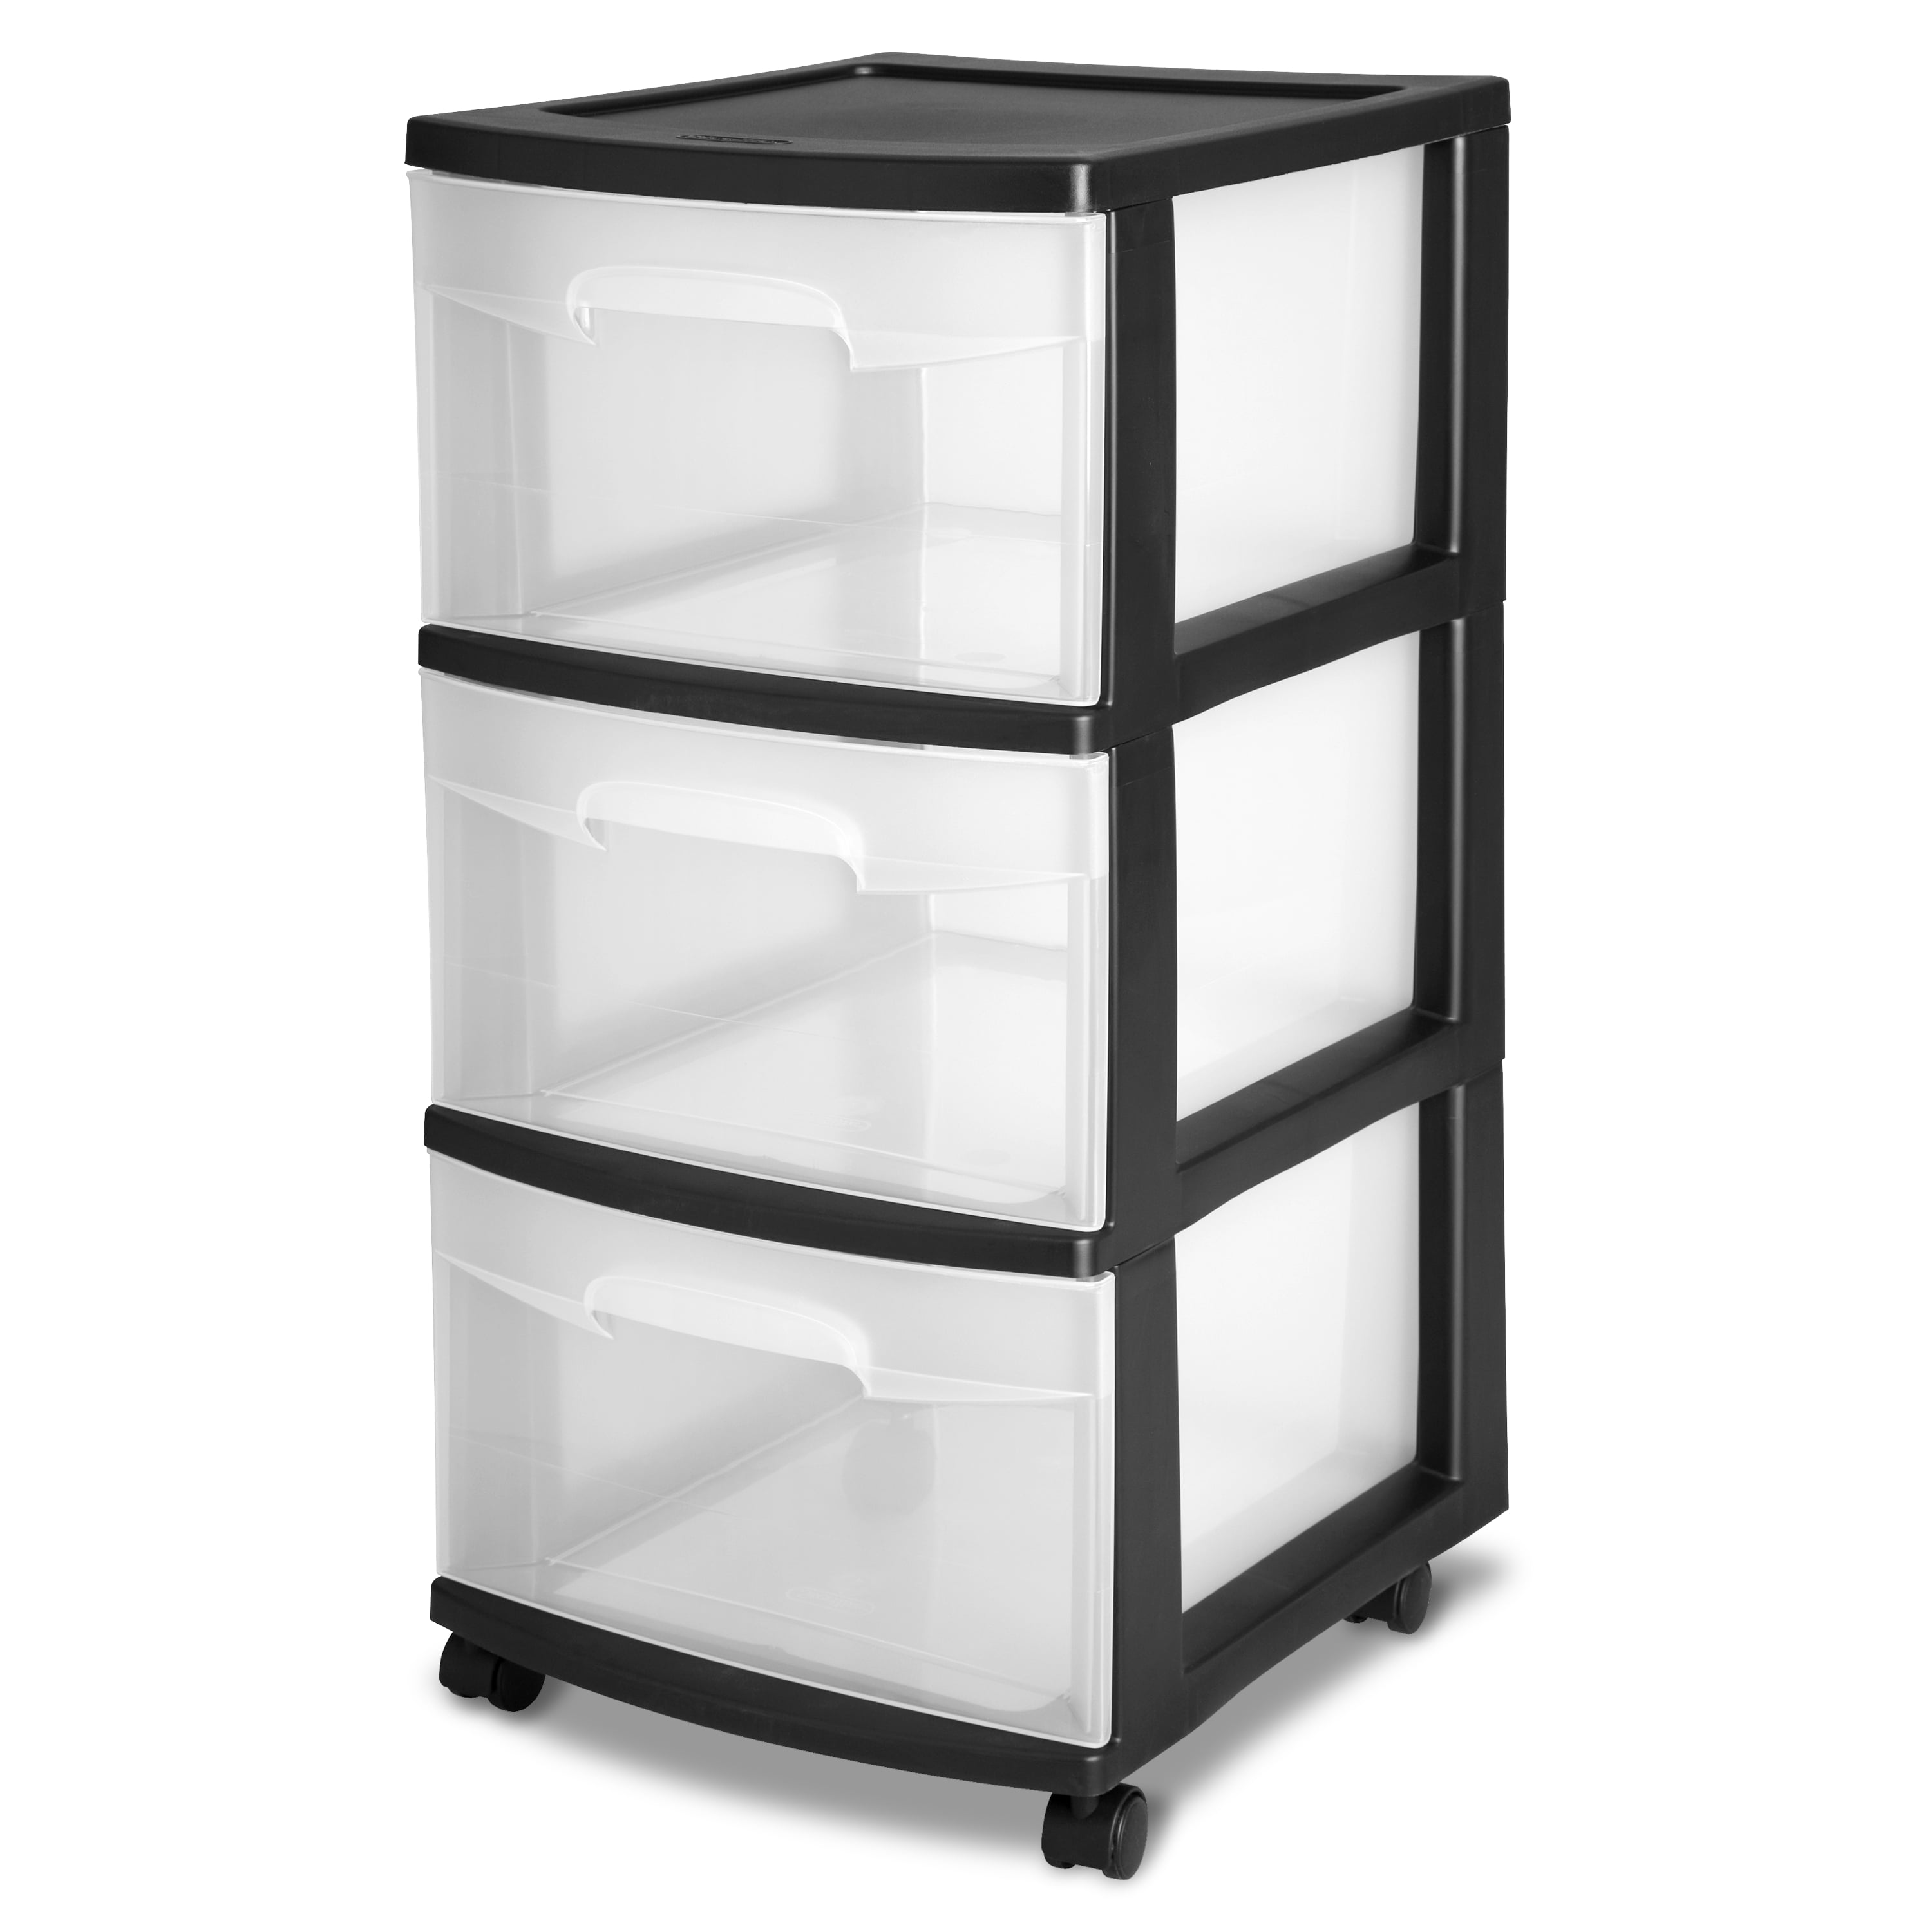 Sterilite 28308002 3 Drawer Cart 12.63 Inches, 4-Pack White Frame with Clear Drawers and Black Casters 